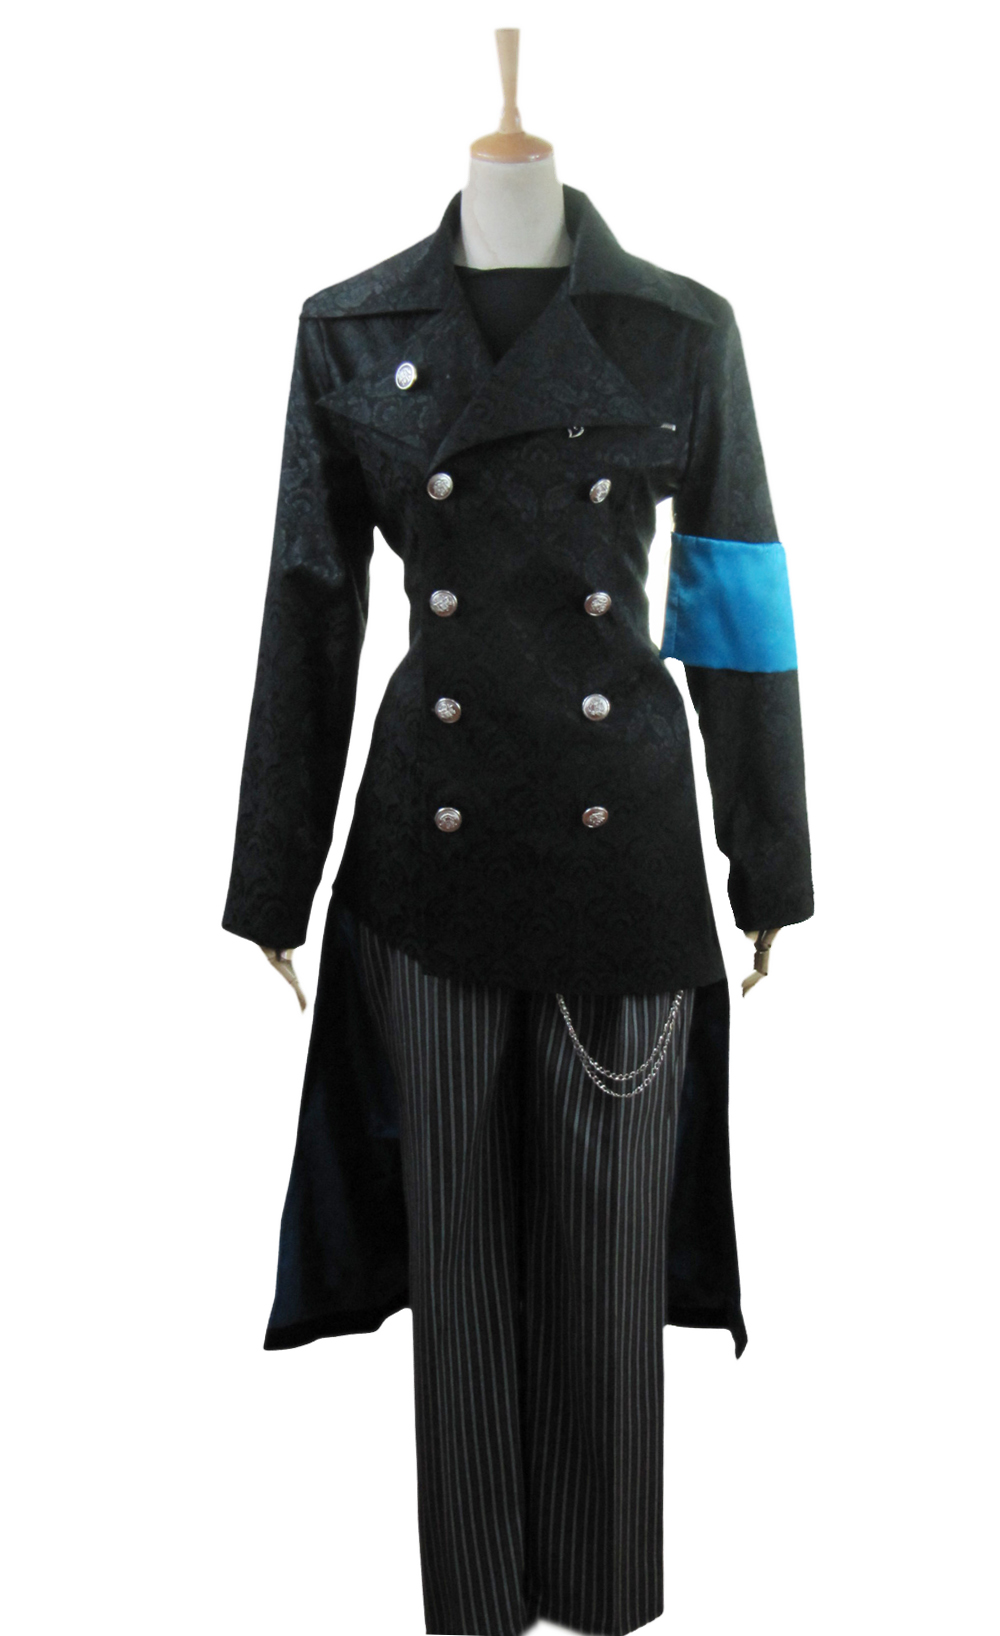 Devil May Cry5 Vergil Yougth Cosplay Costume